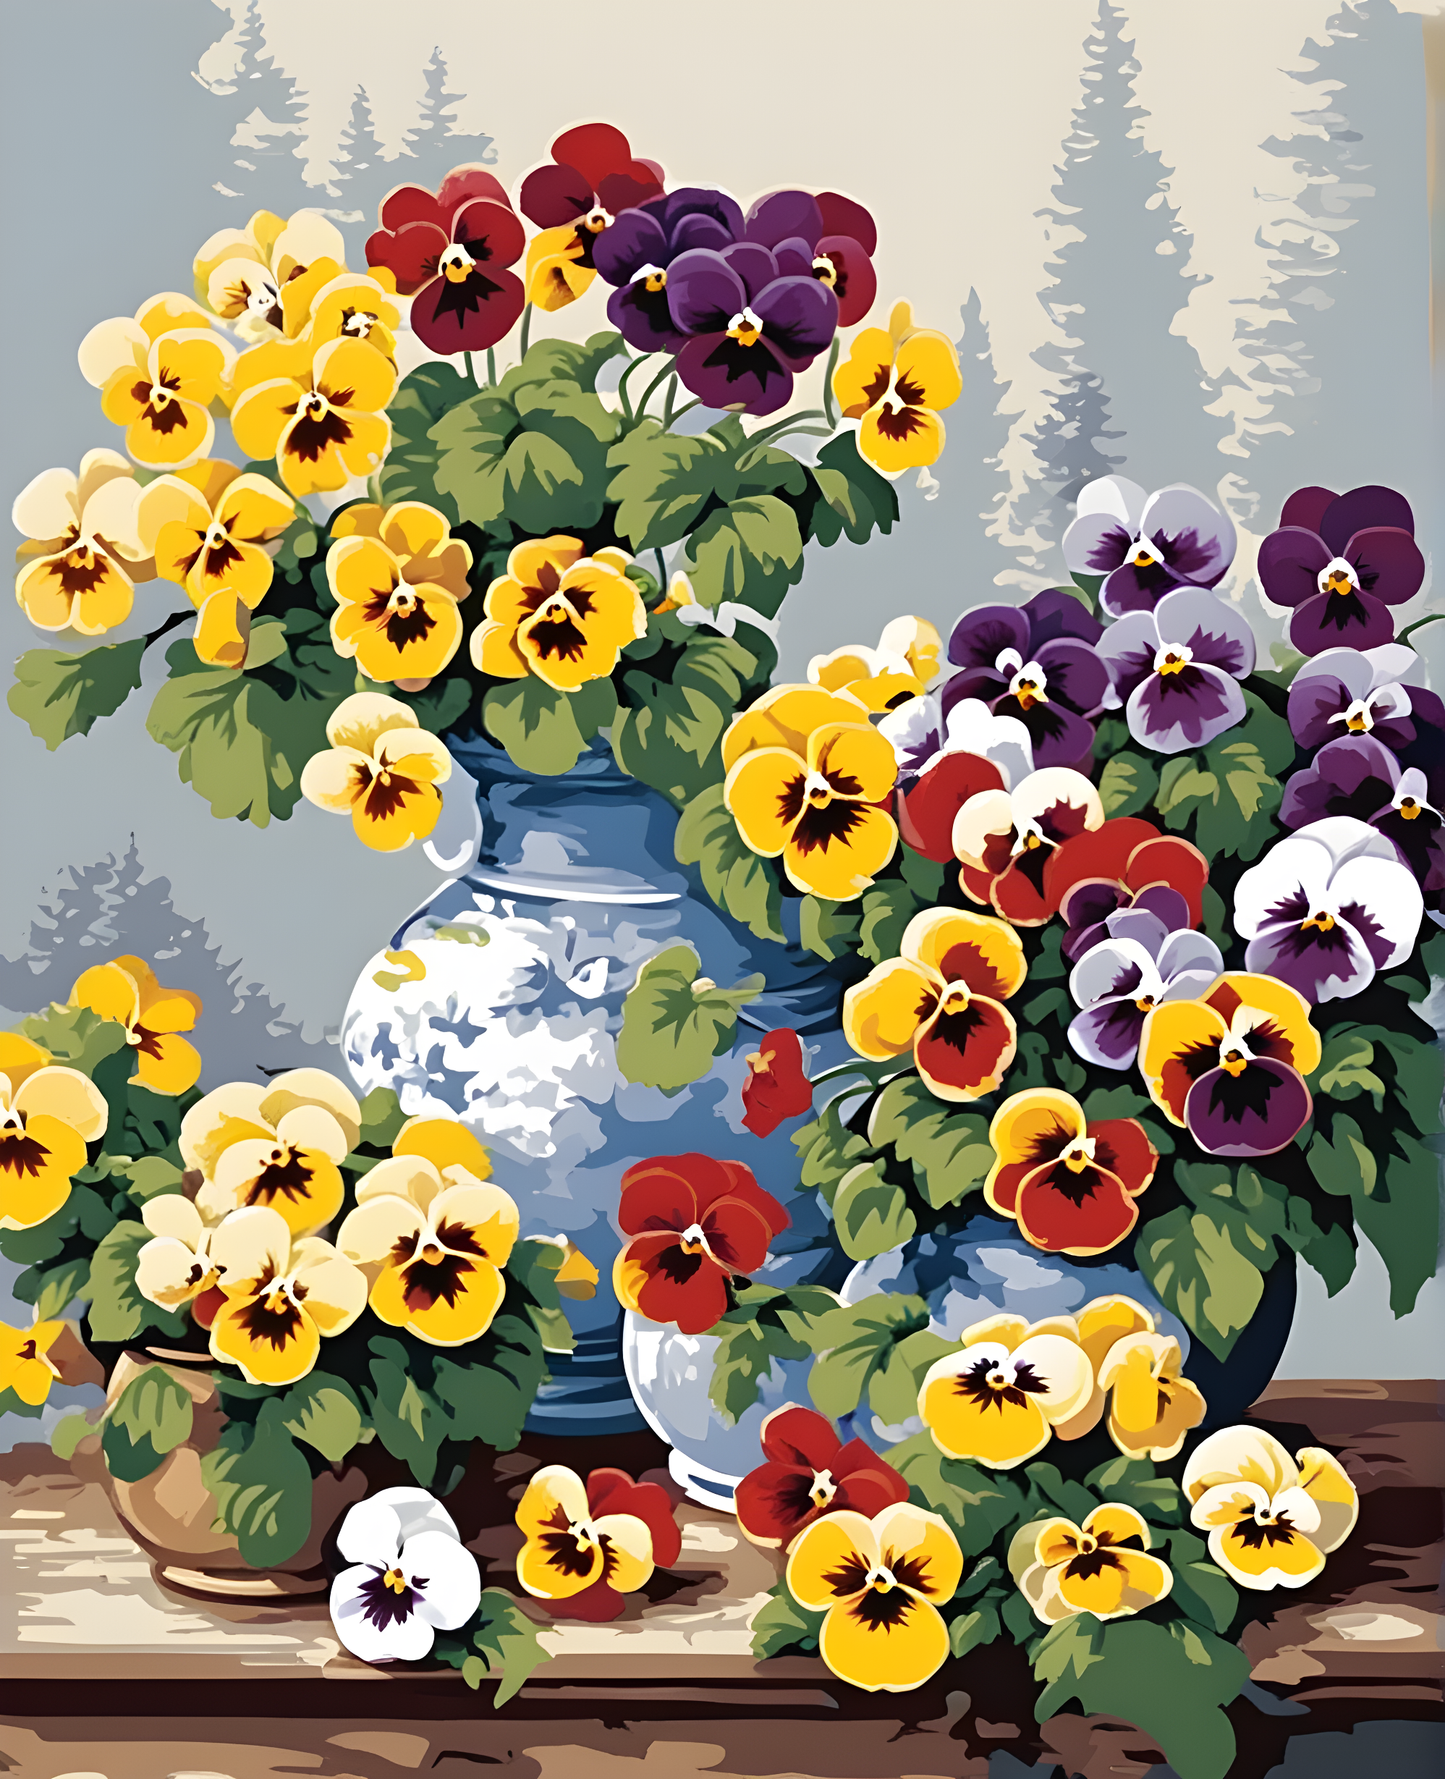 Flowers Collection OD (84) - Pansy - Van-Go Paint-By-Number Kit